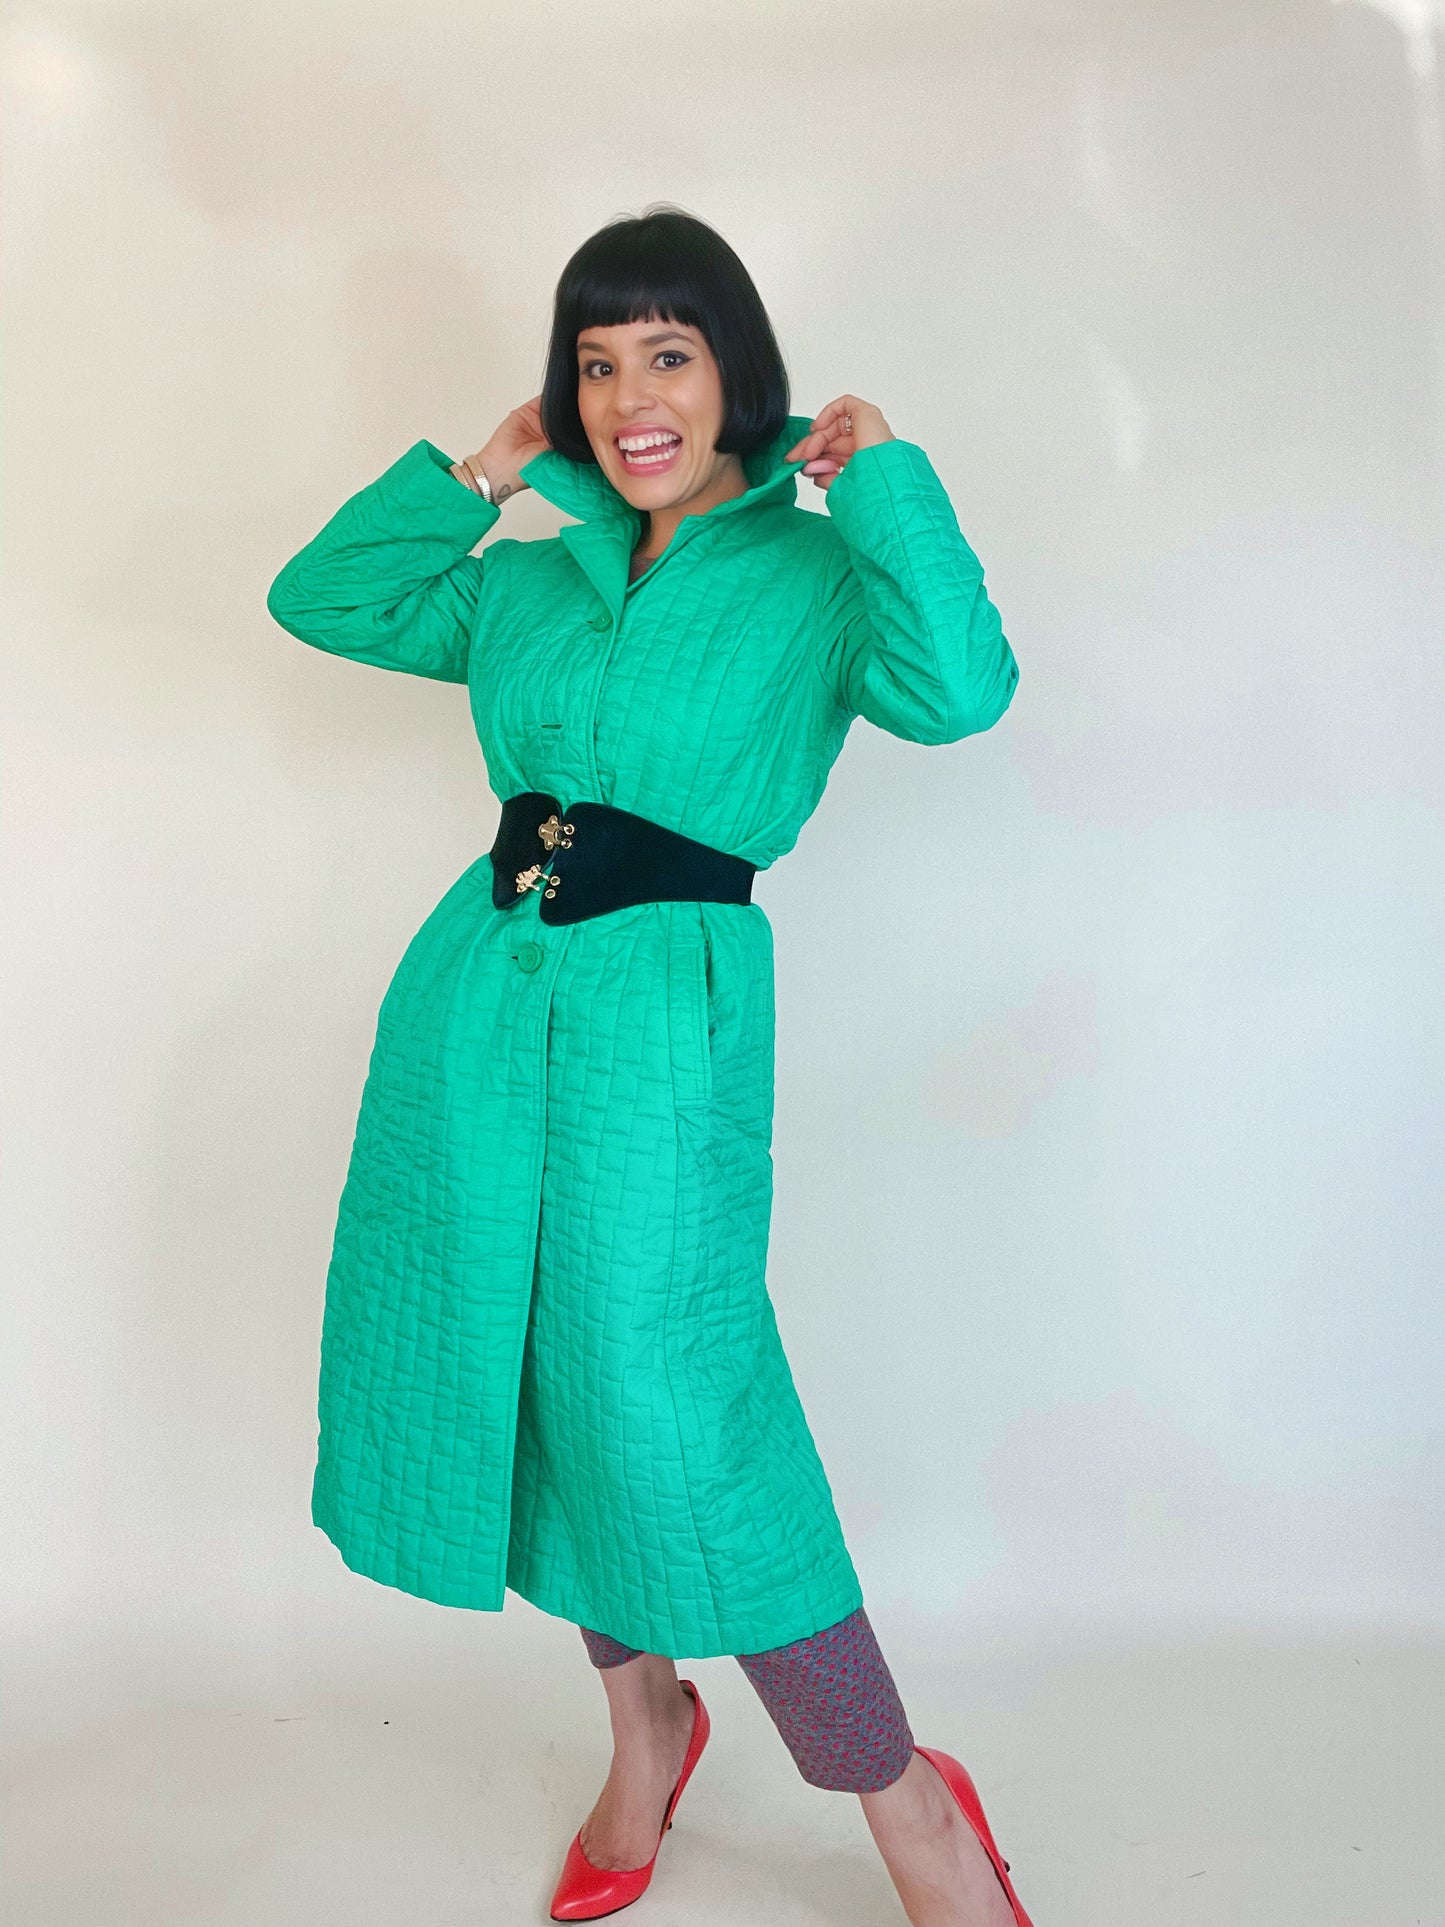 Vintage 60s / 70s Green Quilted Duster Coat Fits Sizes S-L